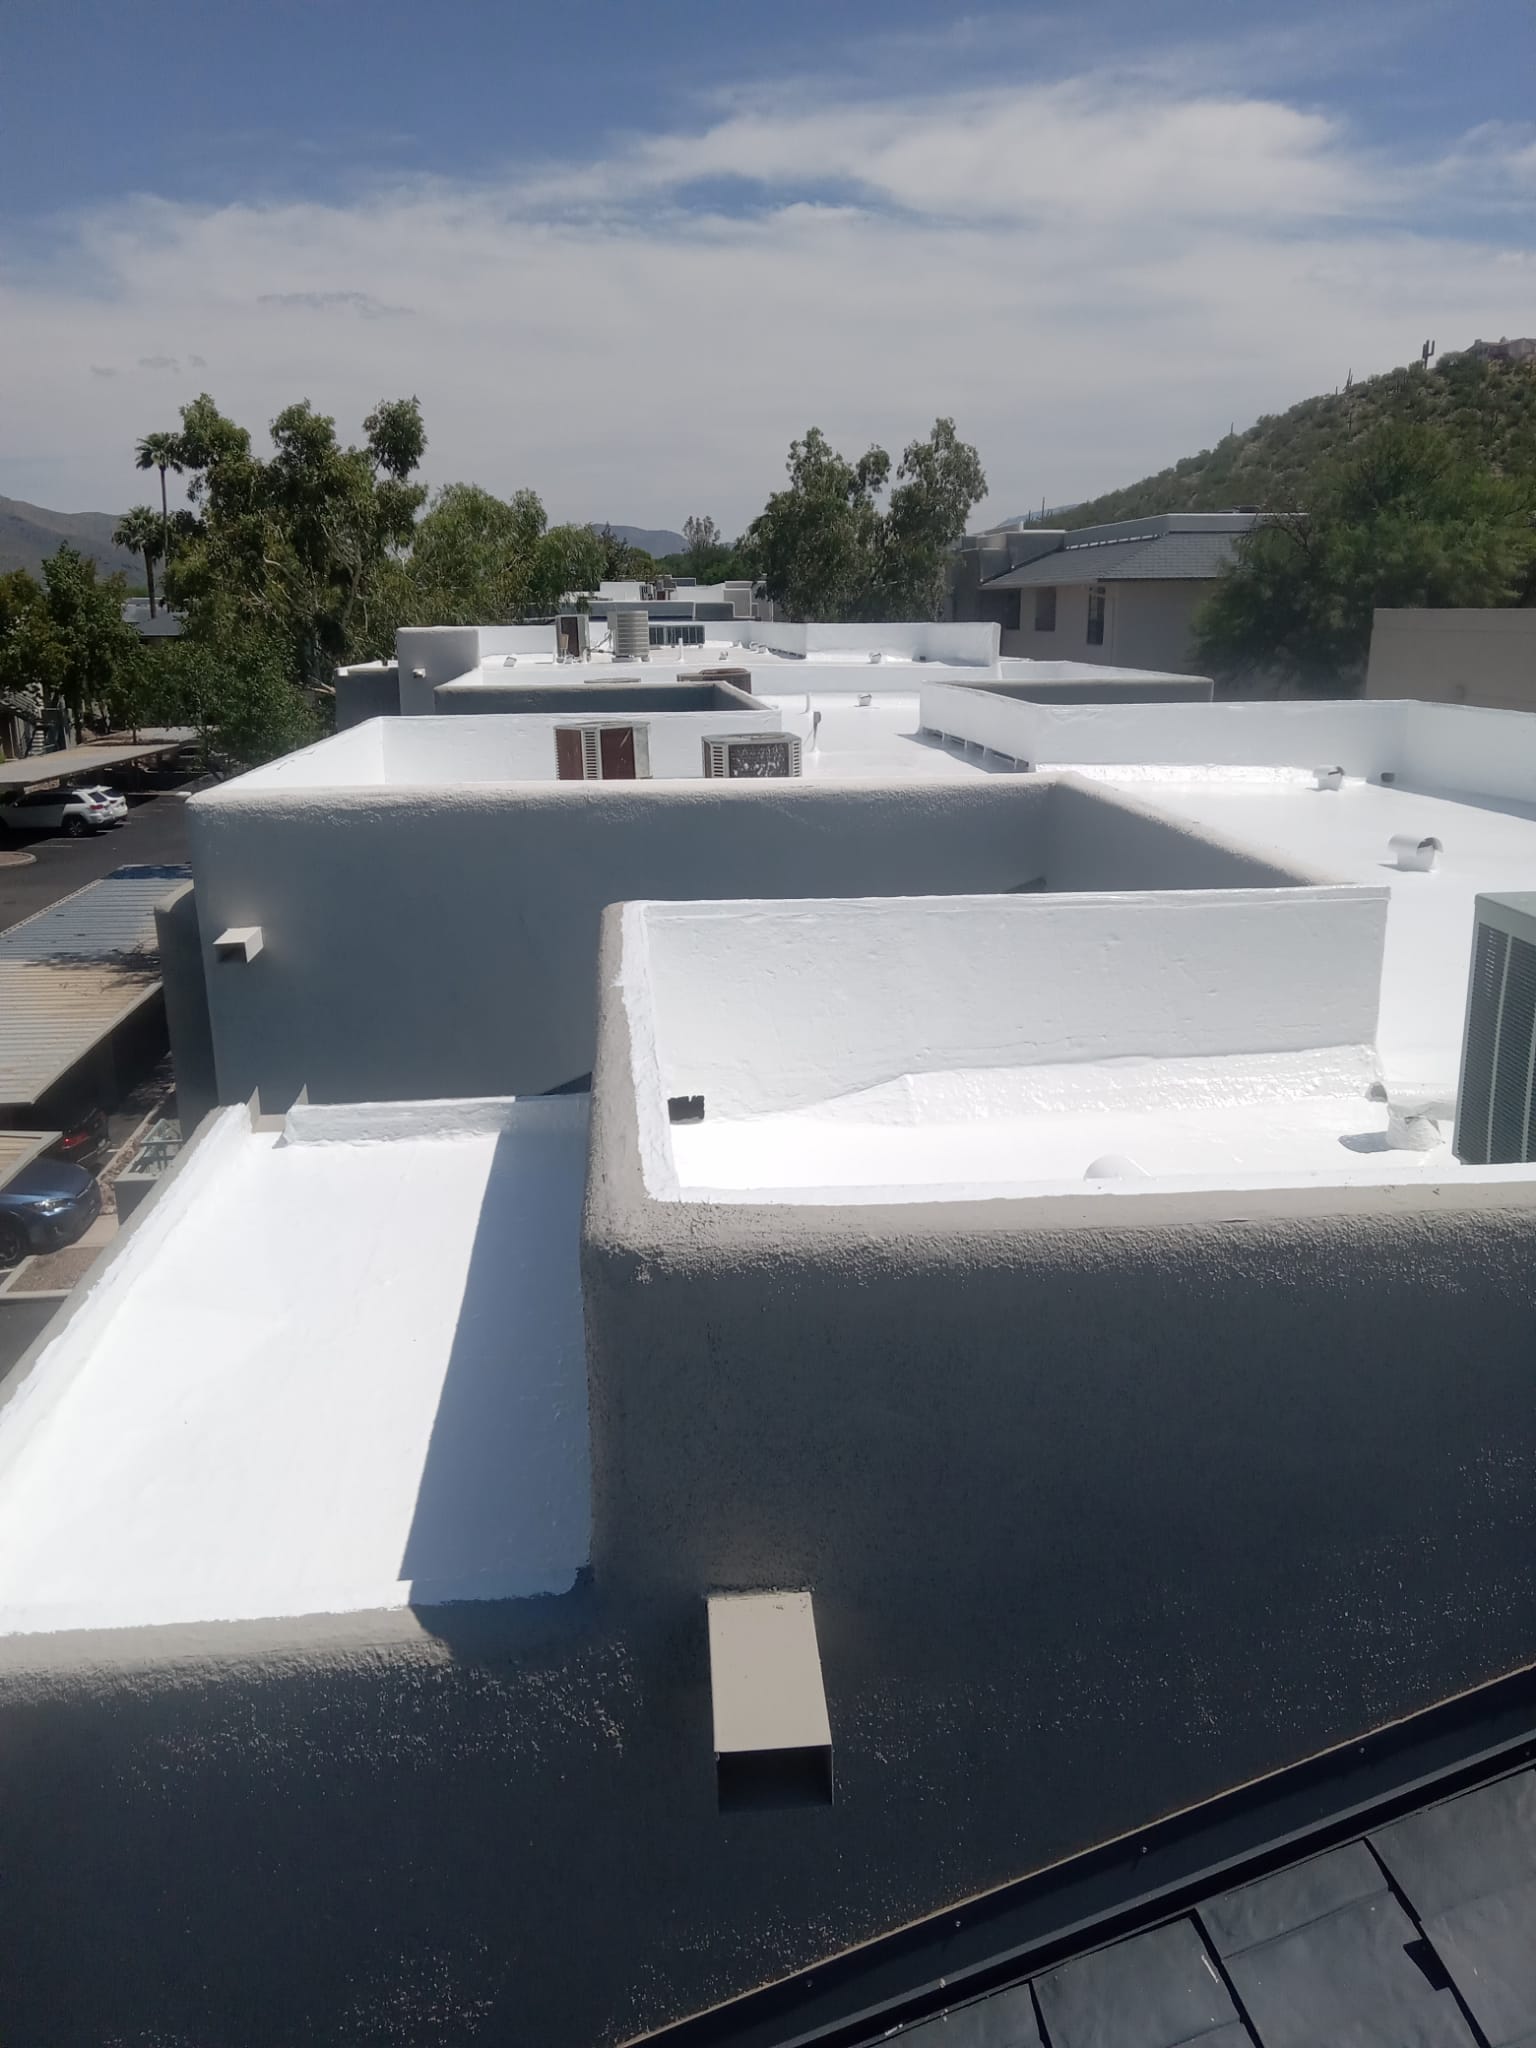 A McCormick Ranch multi-family complex with flat roofs, each uniformly coated with spray foam for enhanced energy efficiency.